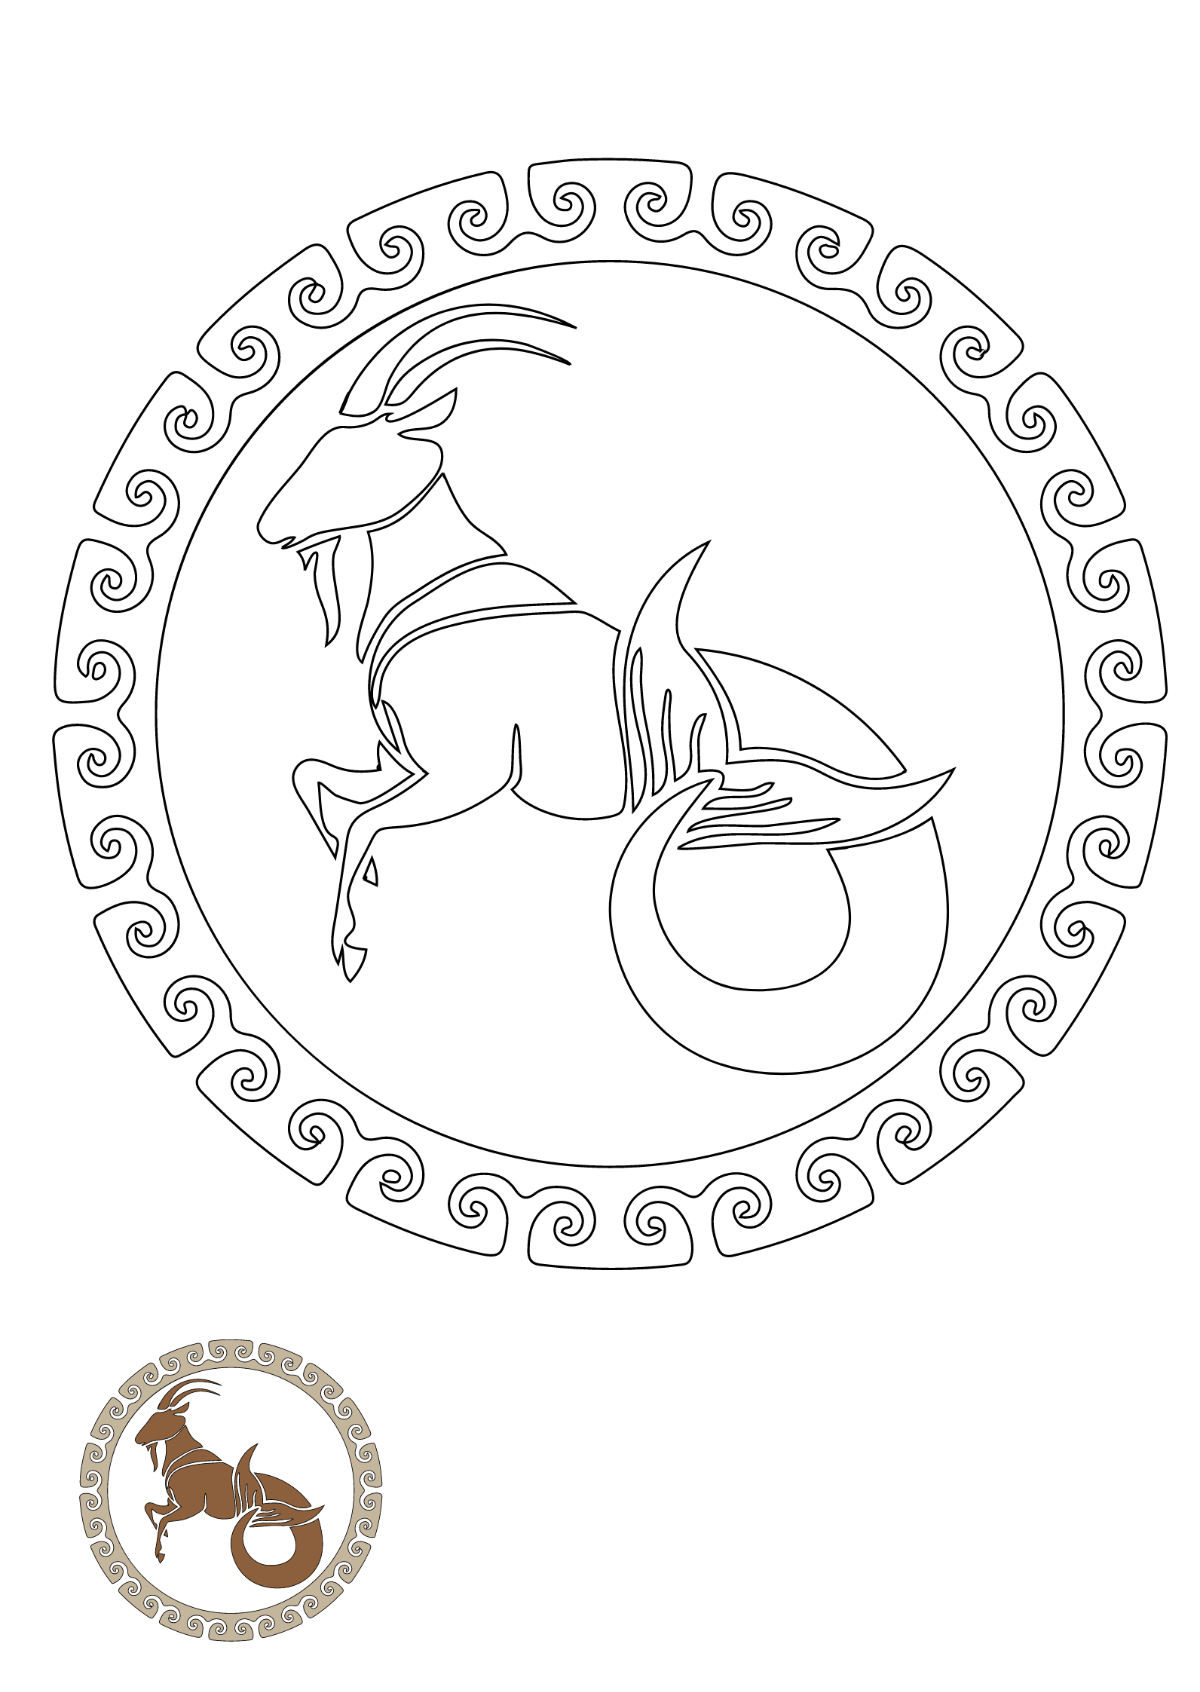 Astrologic Capricorn coloring page Template